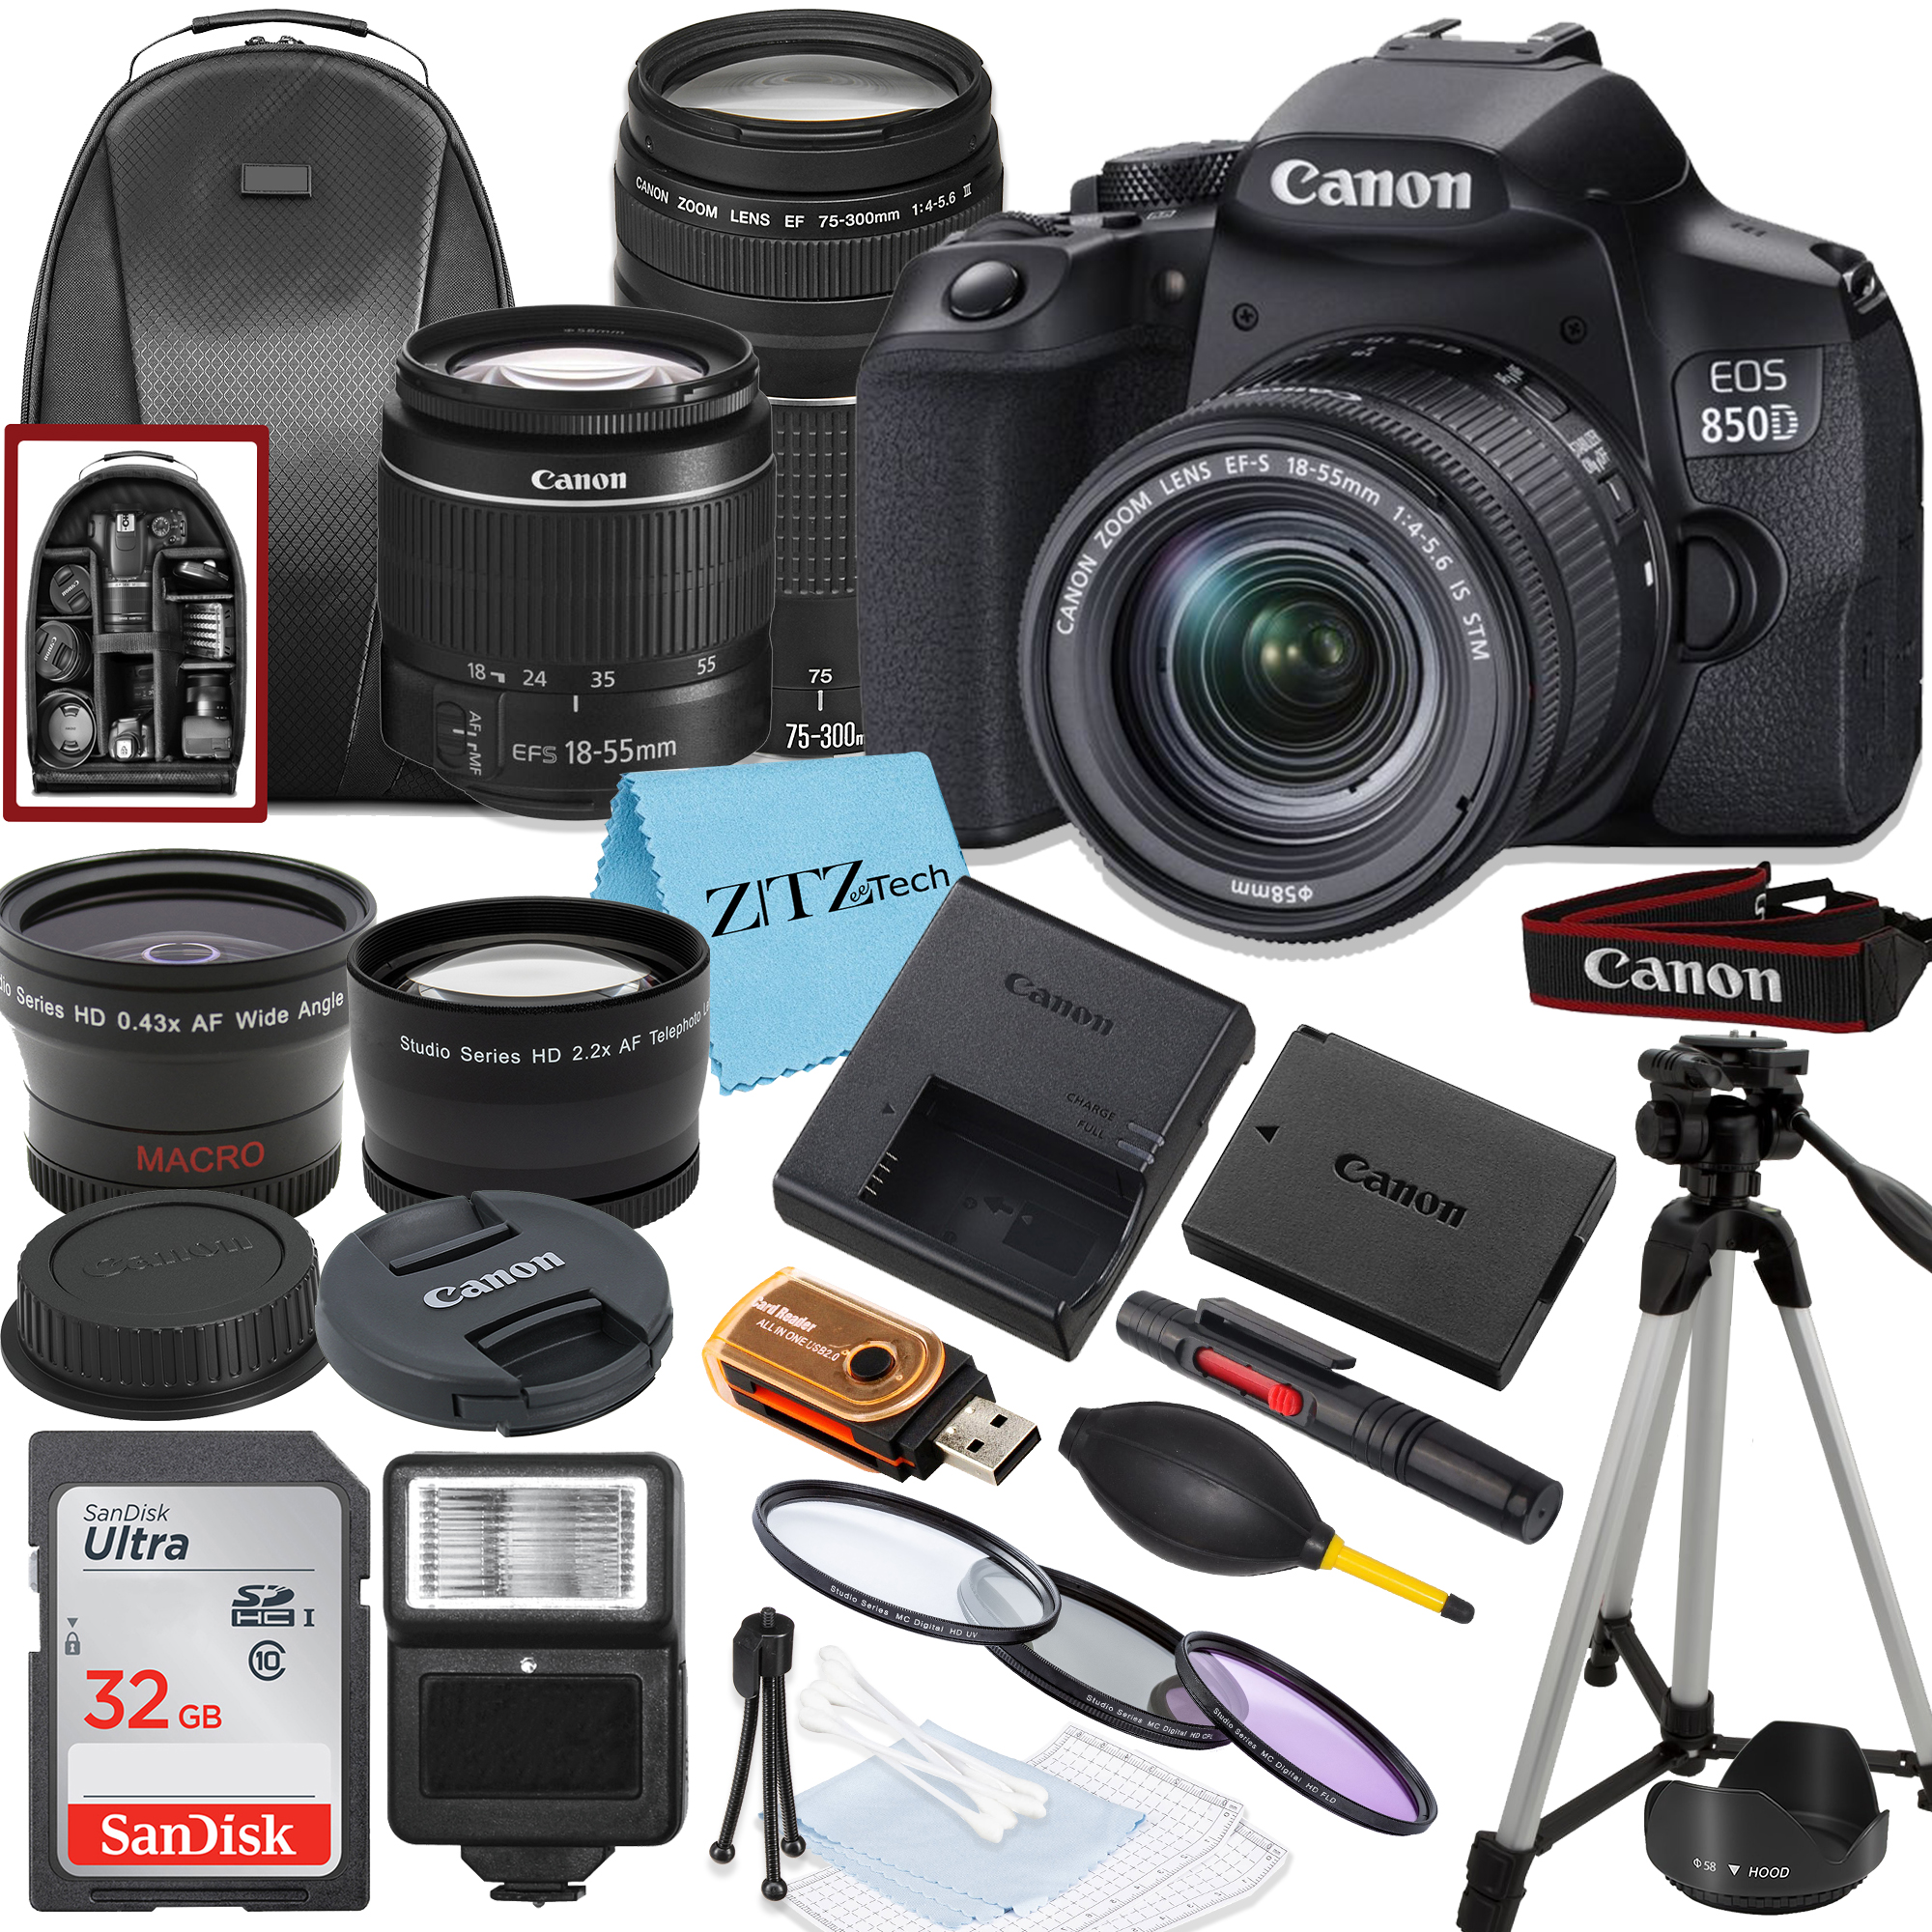 Canon EOS 850D / Rebel T8i DSLR Camera Bundle with 18-55mm, 75-300mm Lens, SanDisk 32GB Memory Card, Tripod, Backpack and ZeeTech Accessory